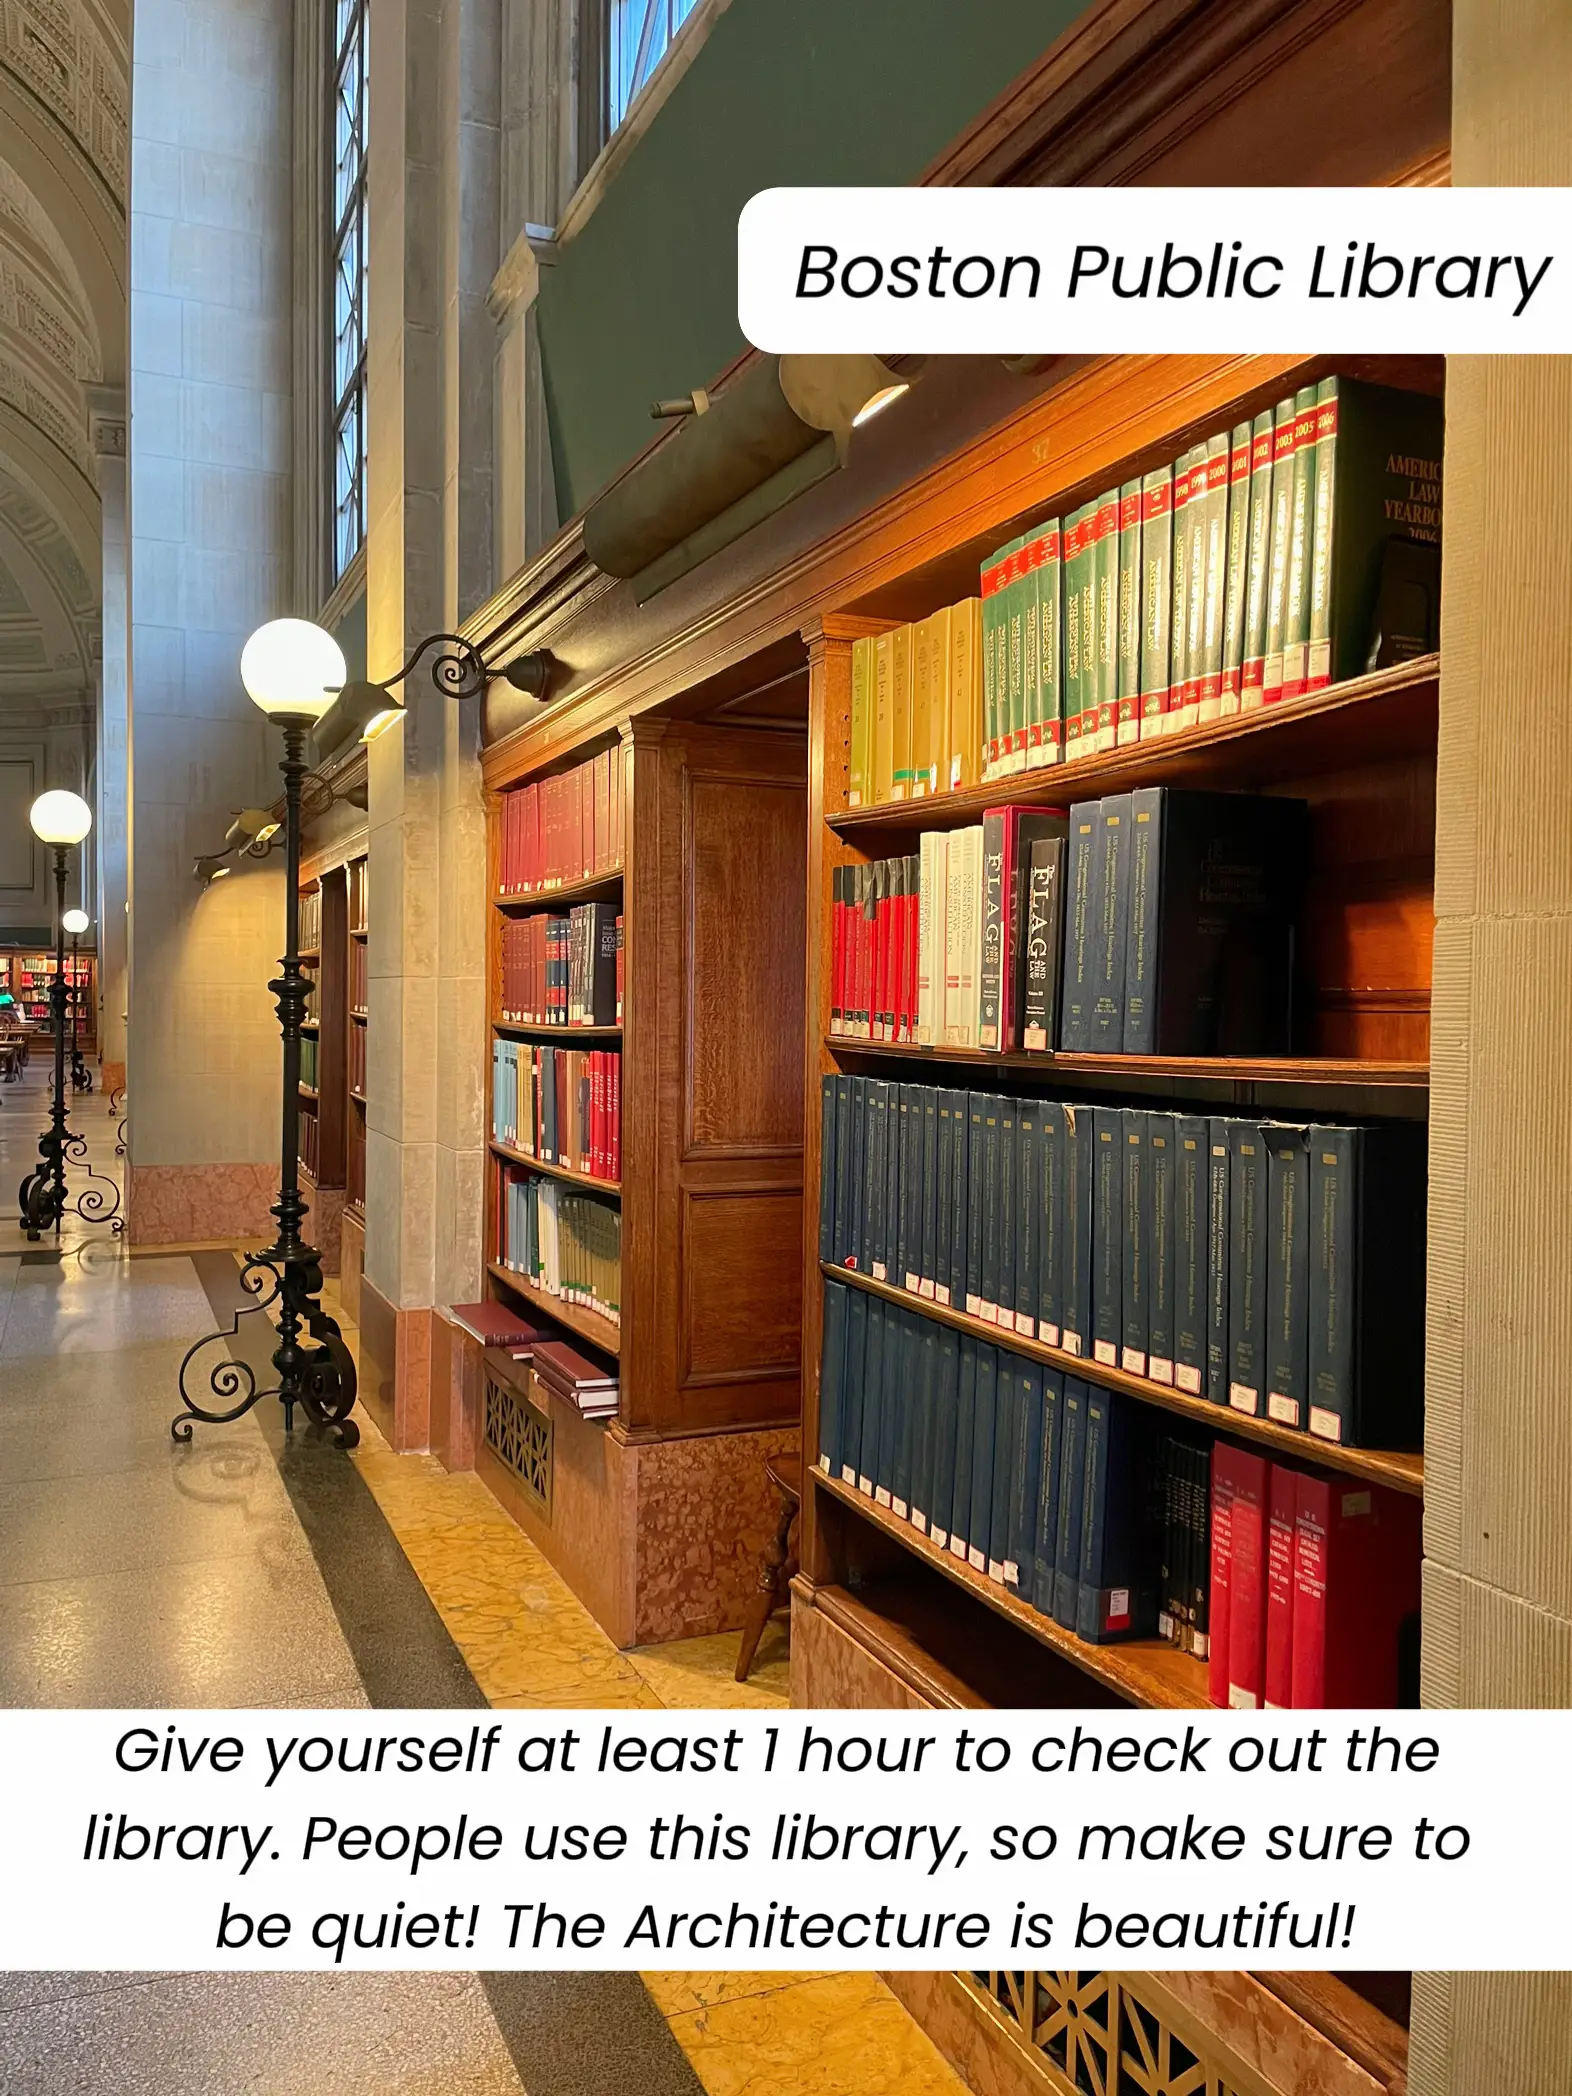 Green - Bates Hall: A Tranquil Space at Boston Central Library